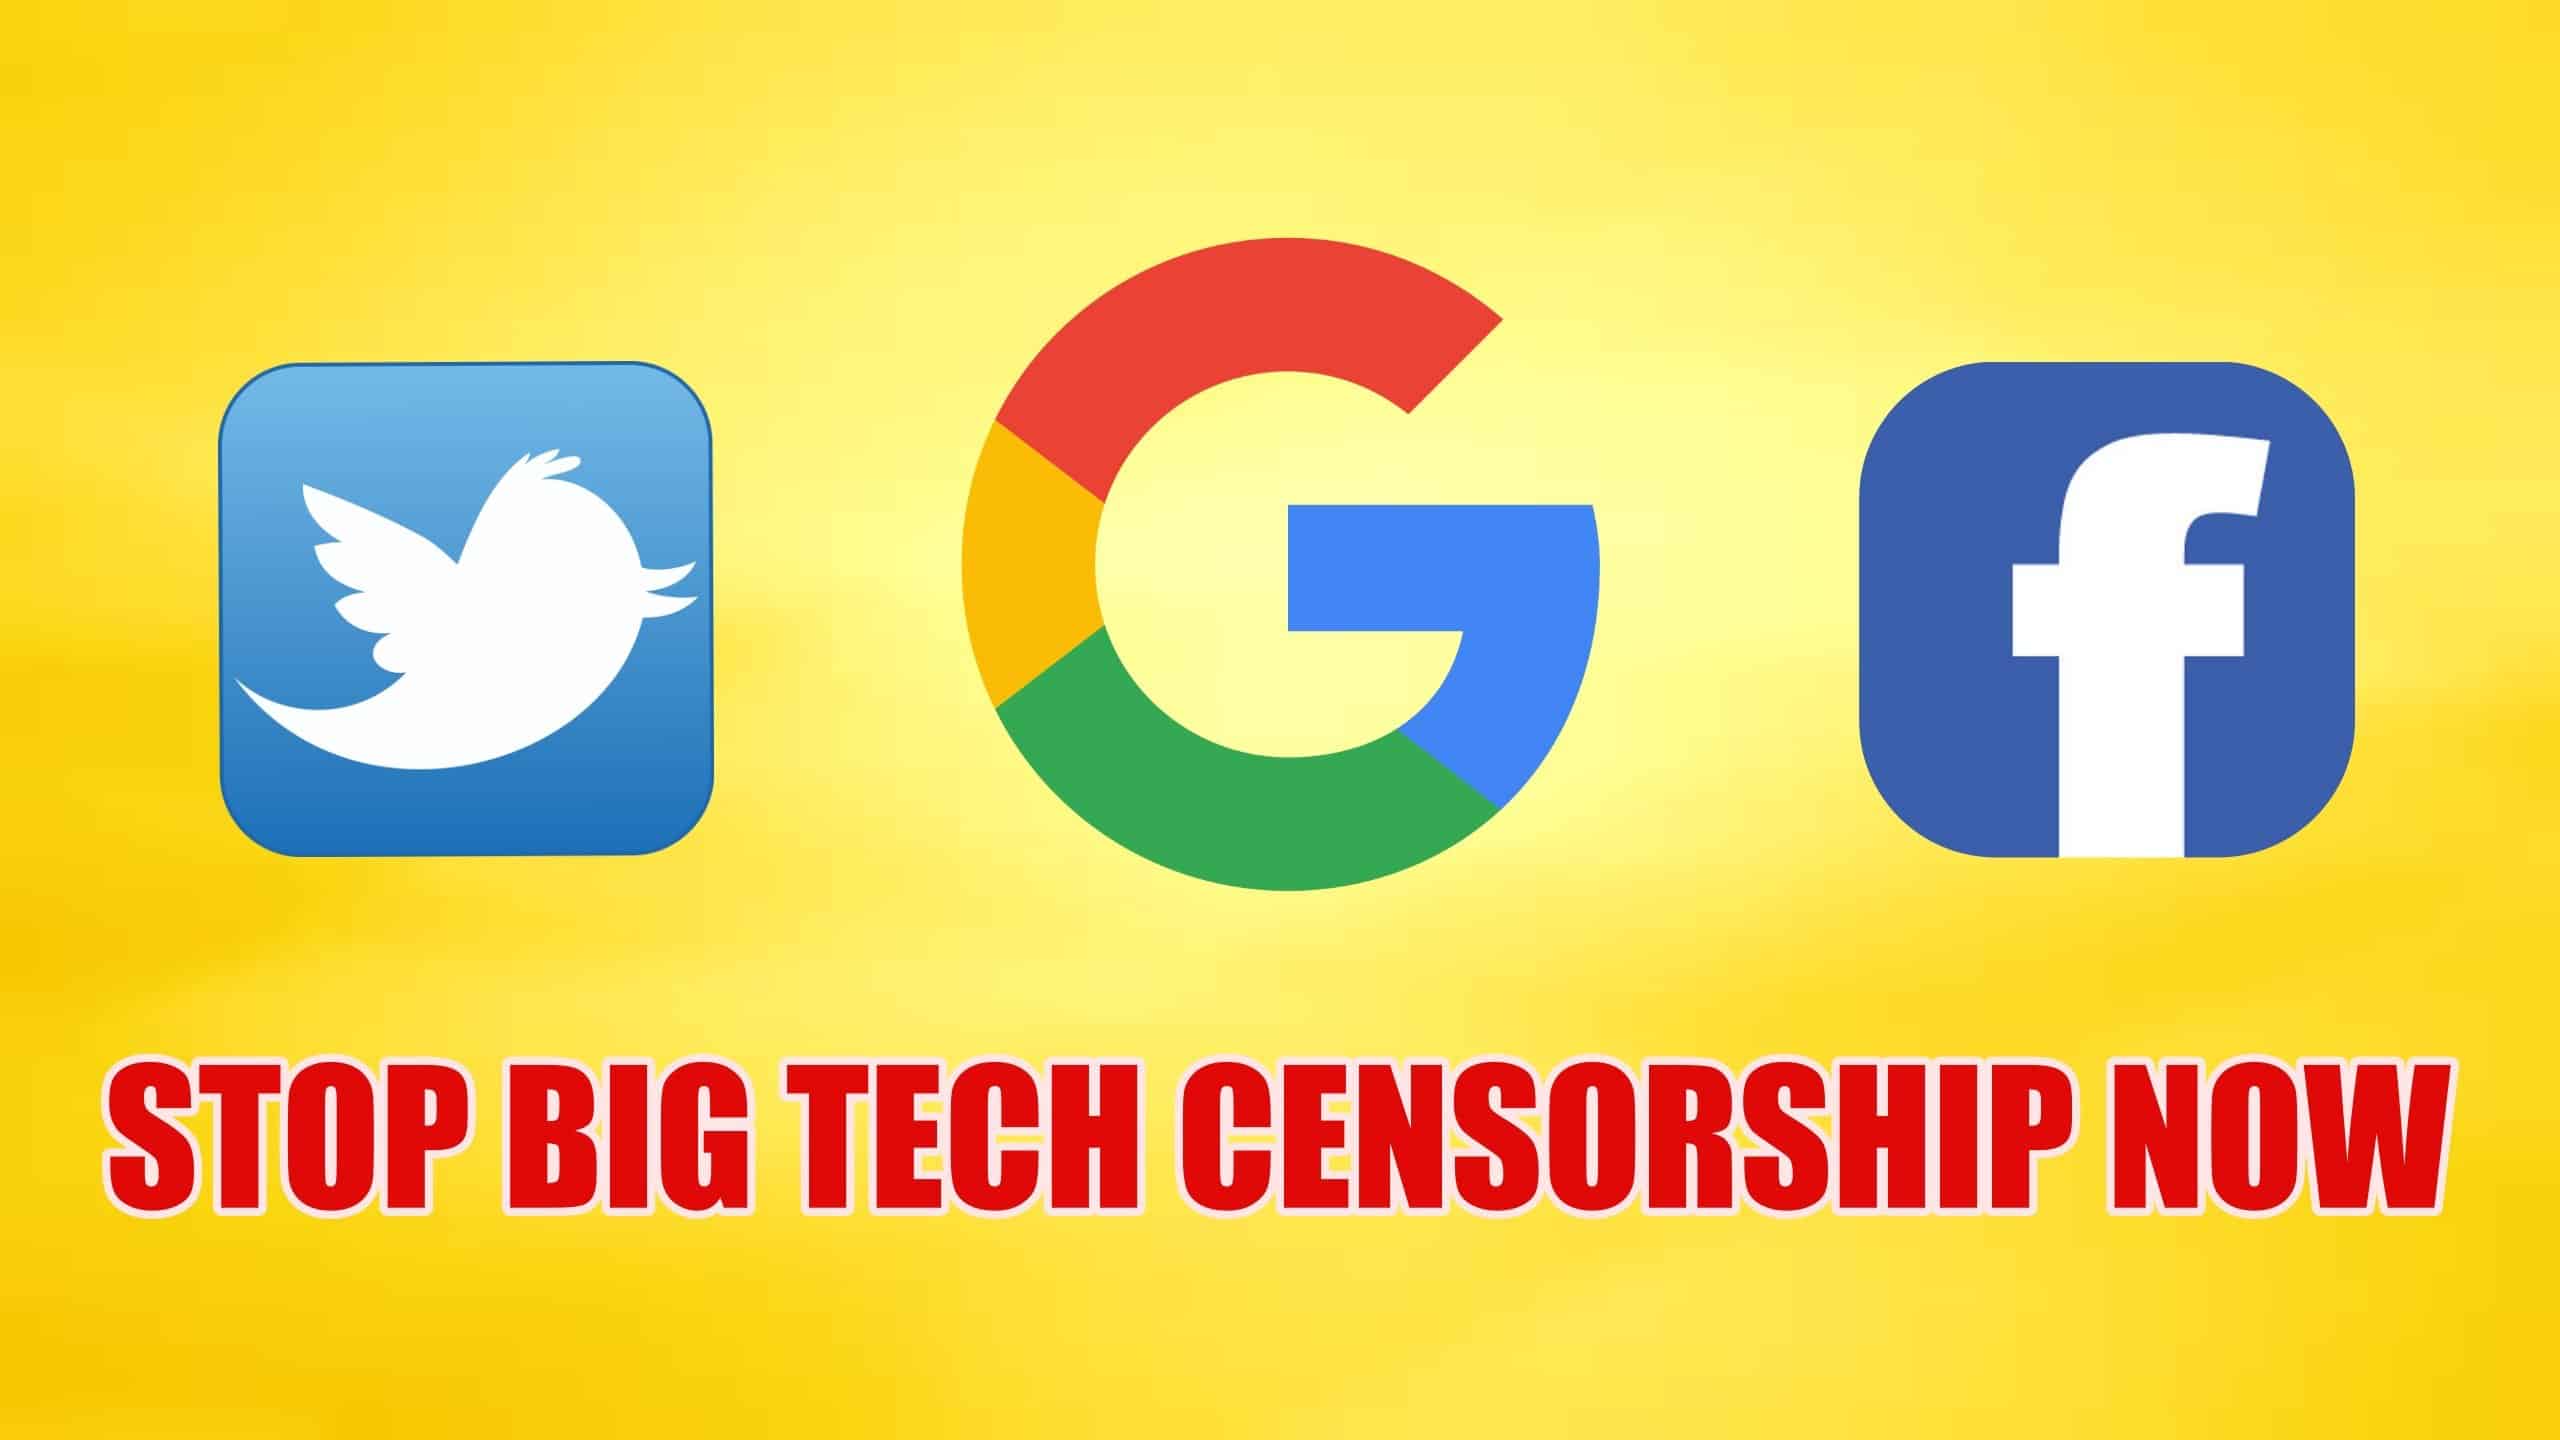 Texas Attorney General Vows to Fight Big Tech Censorship
with Everything He’s Got 1